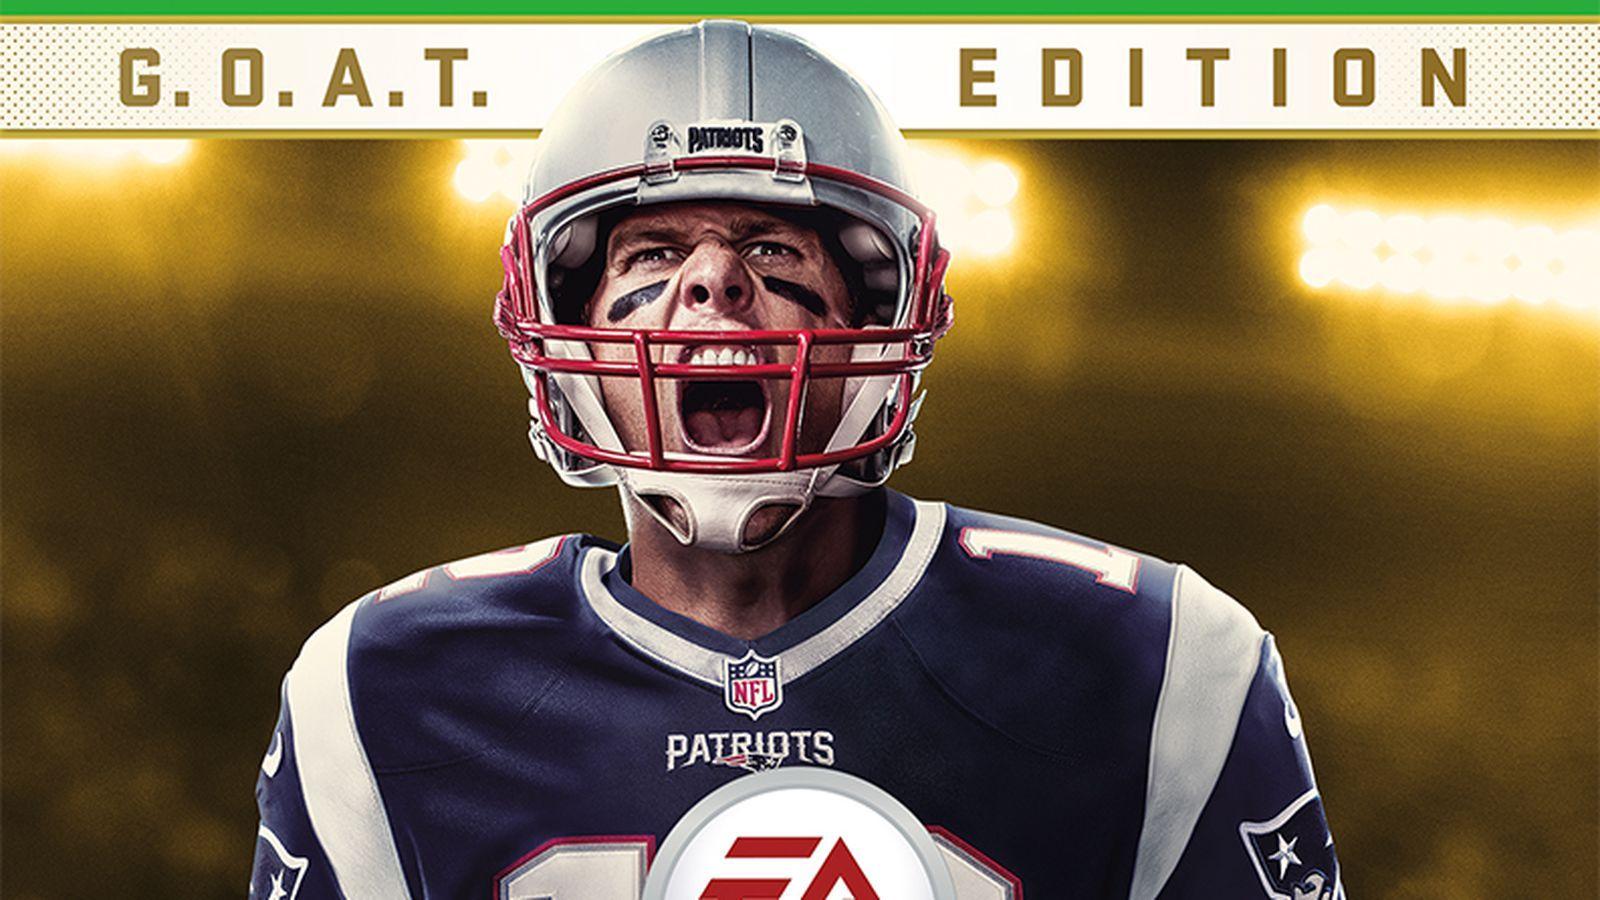 Tom Brady is on the cover of 'Madden 18: G.O.A.T. Edition